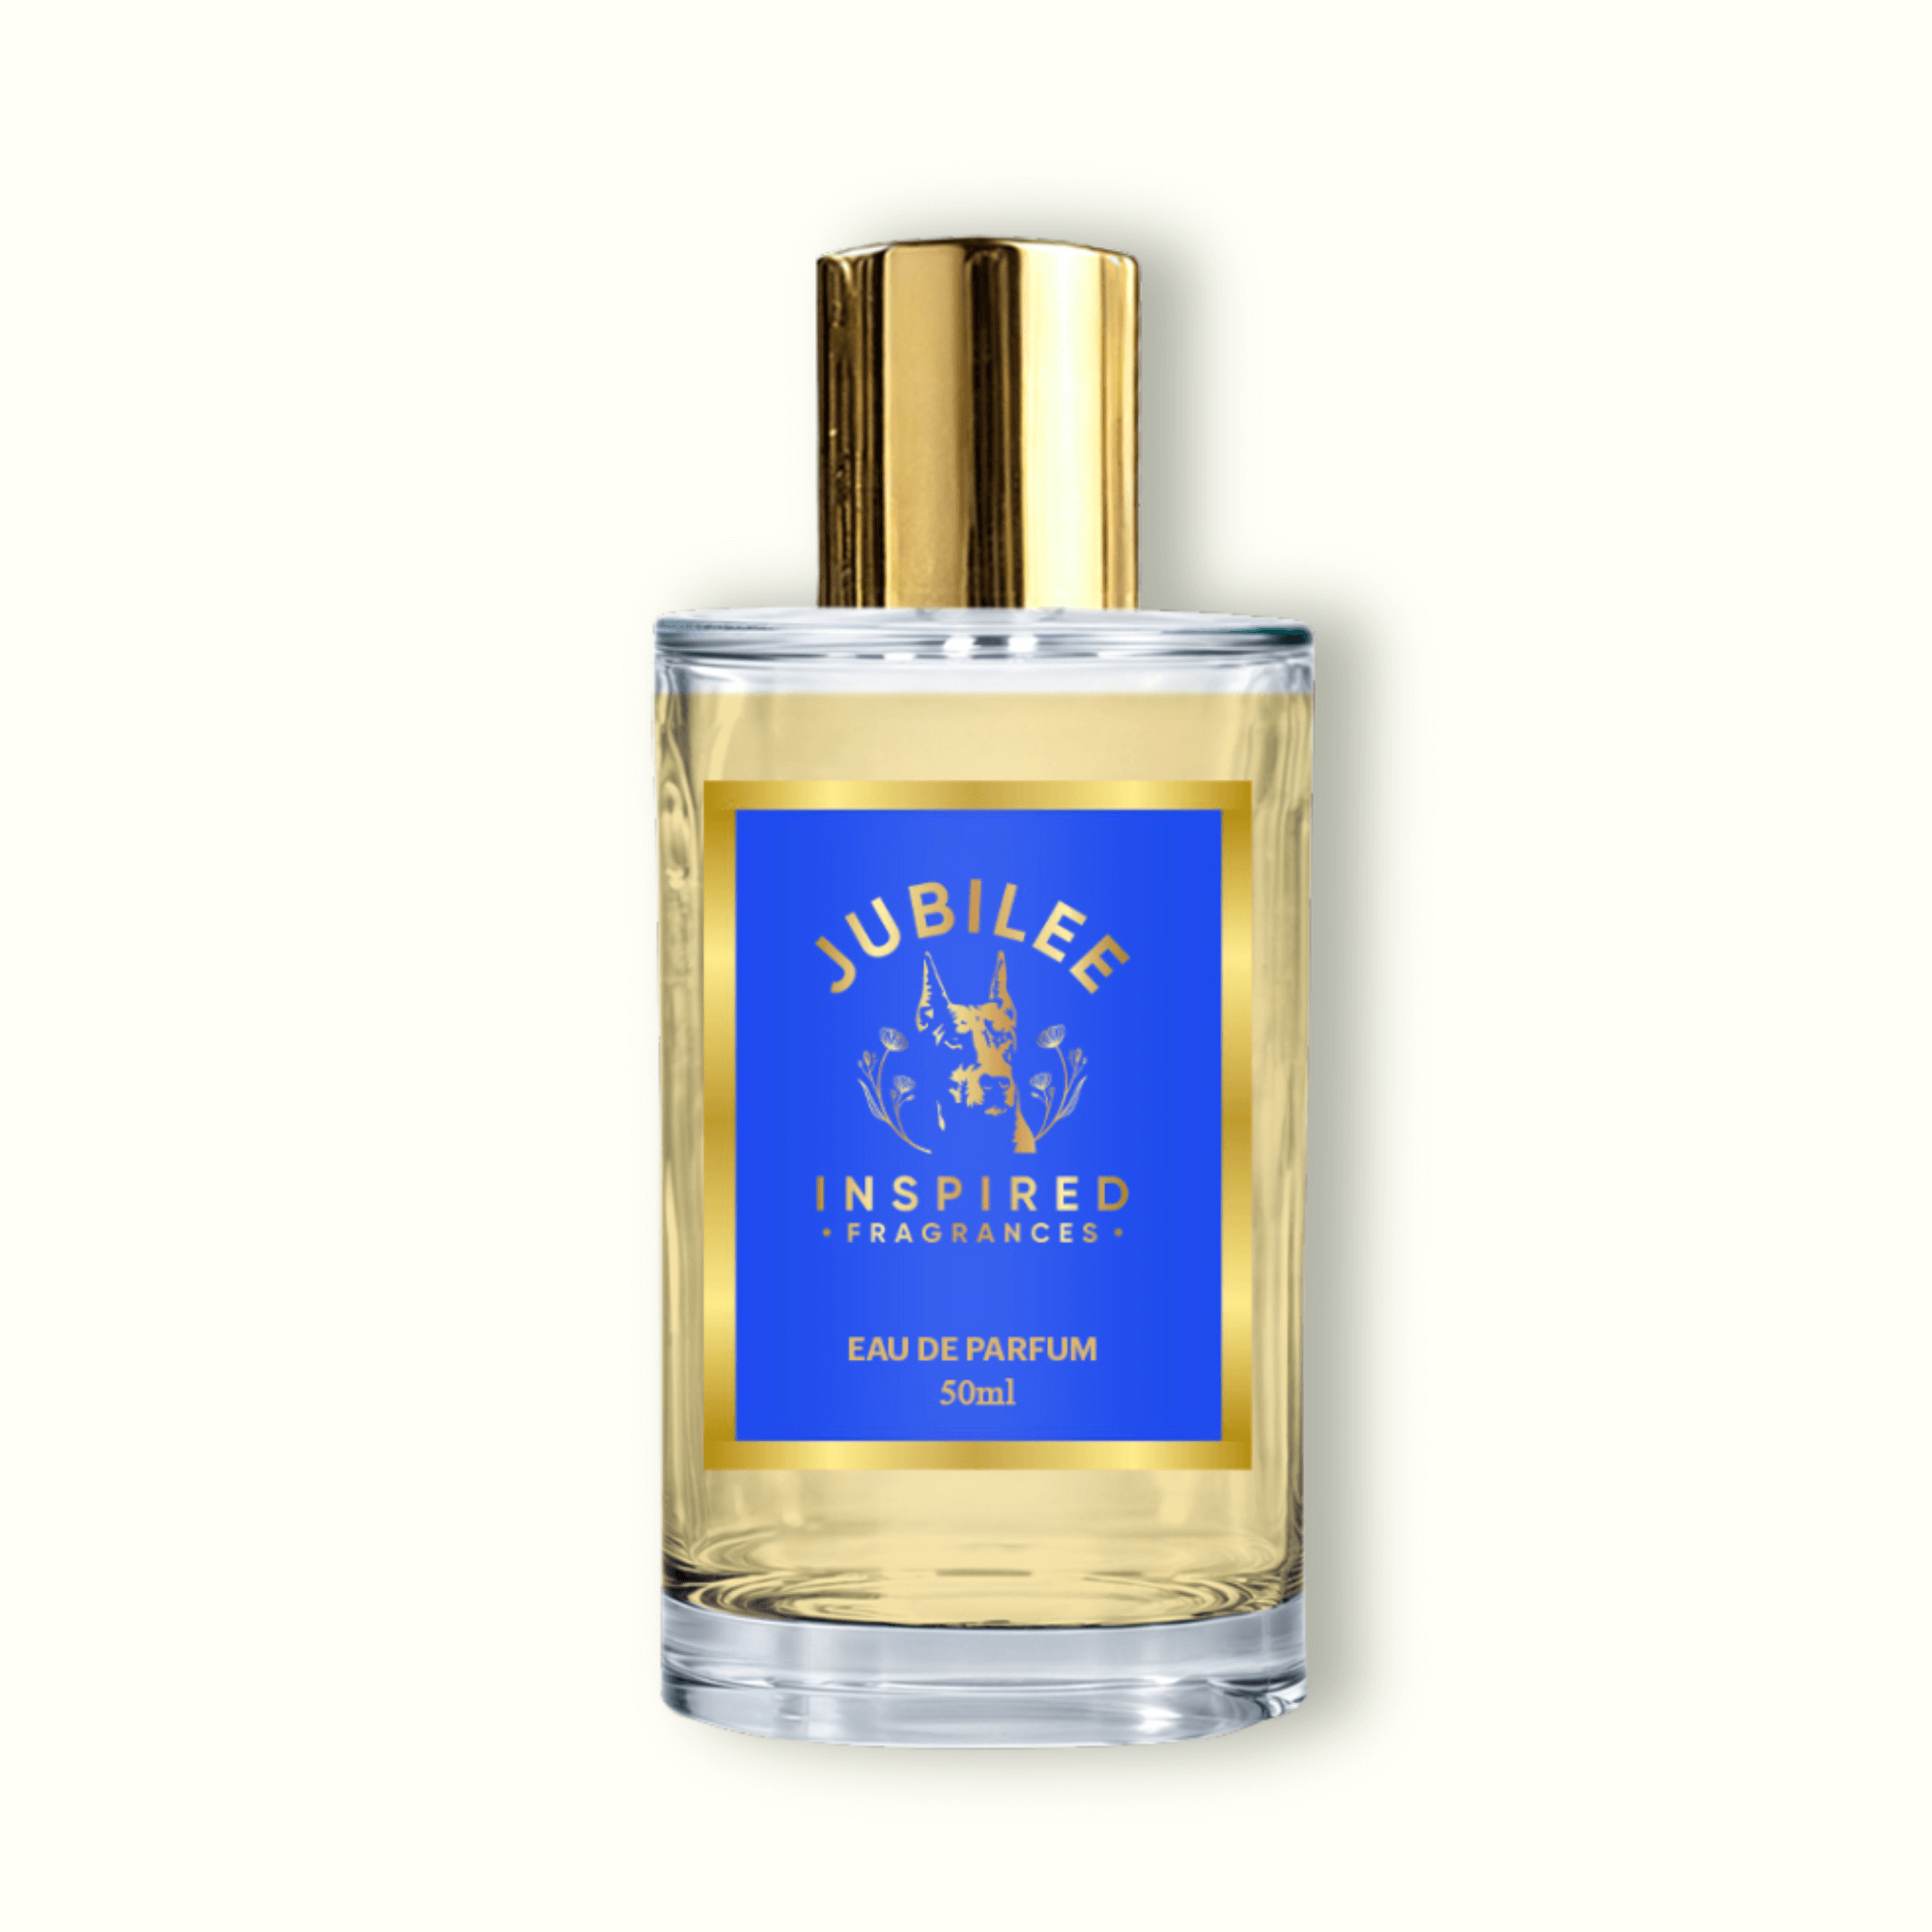 Inspired by PRDA - L'Homme - PD184 dupe perfume , clone perfume , copy perfume